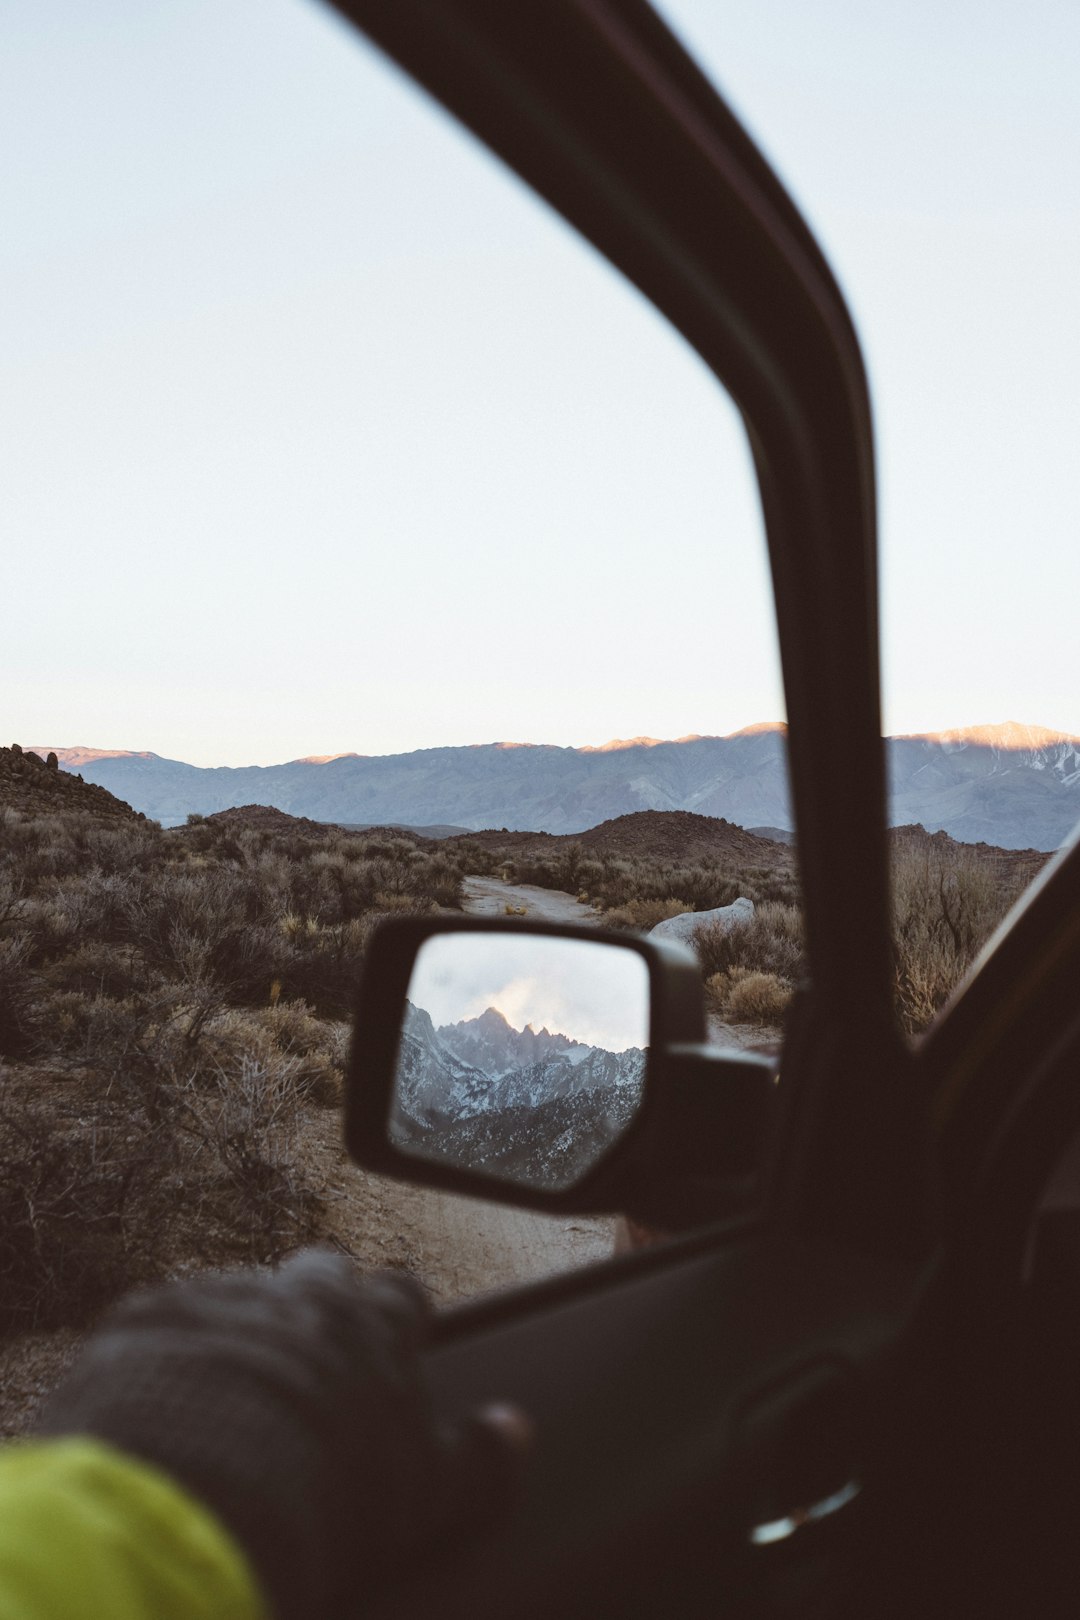 Driving through dirt roads in the Sierras, had to stop and take this photo at sunset. The mountain in the mirror is Mt Whitney, highest summit in the contiguous states.